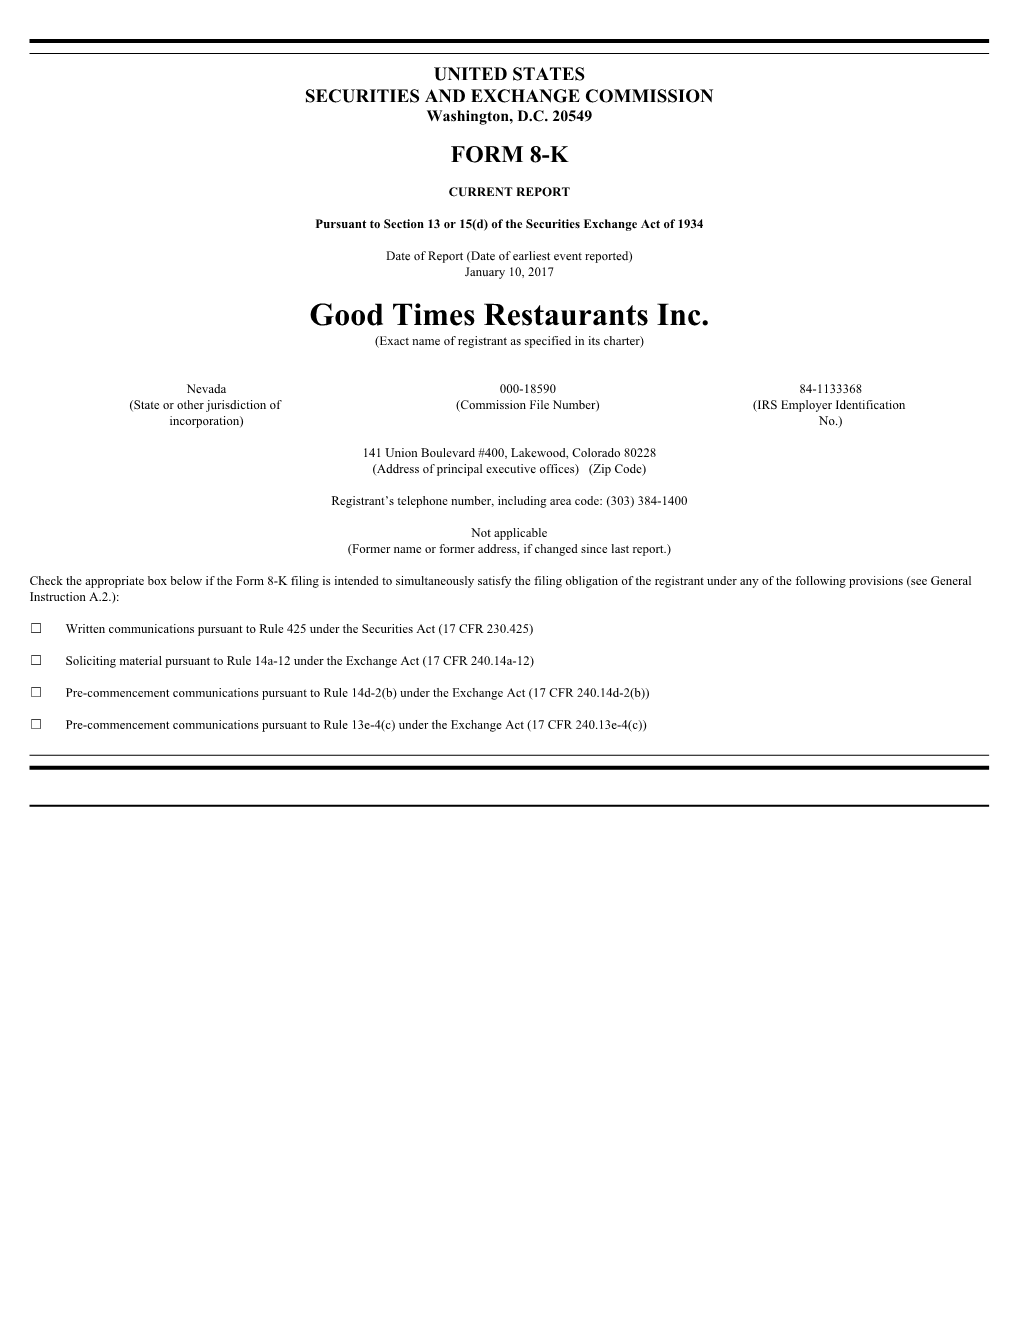 Good Times Restaurants Inc. (Exact Name of Registrant As Specified in Its Charter)